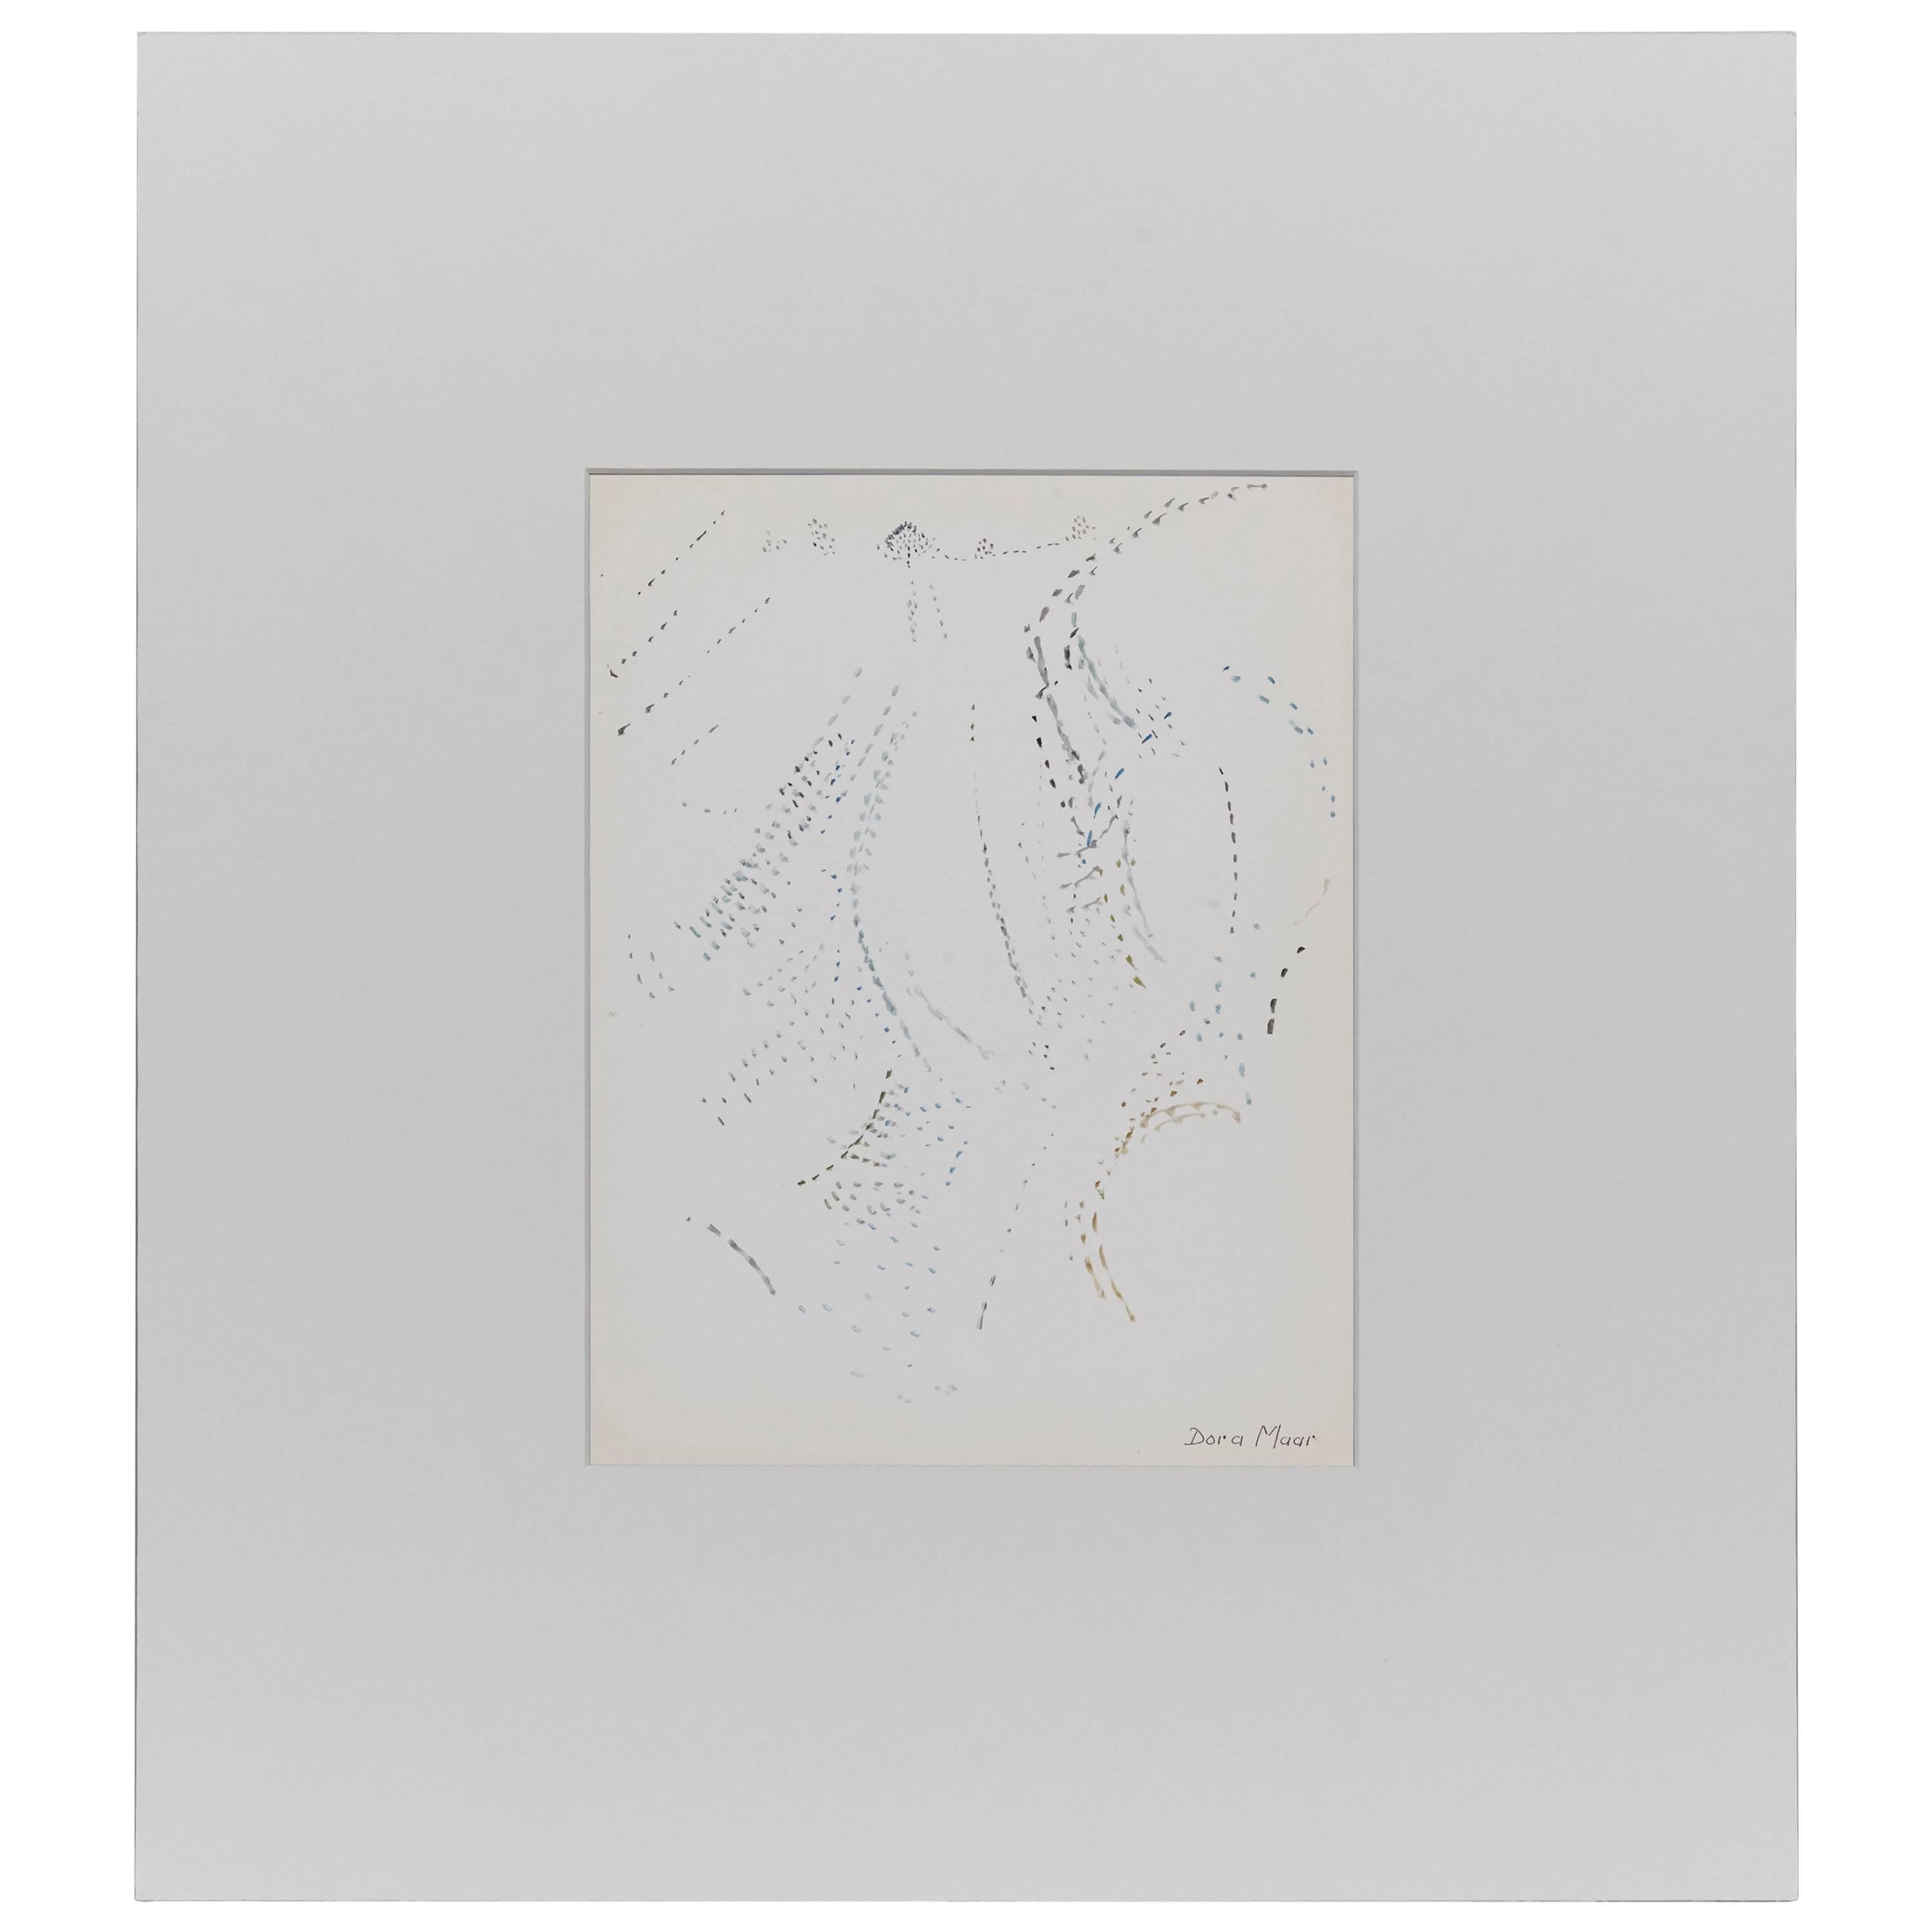 Pointillist composition by Dora Maar.
Signed in ink in the lower right corner.
Two faces drawing.

Authenticity stamp of the auction that took place in 1998 in Paris.
Black ink on cream white paper, 
20th century, undated.

In good original